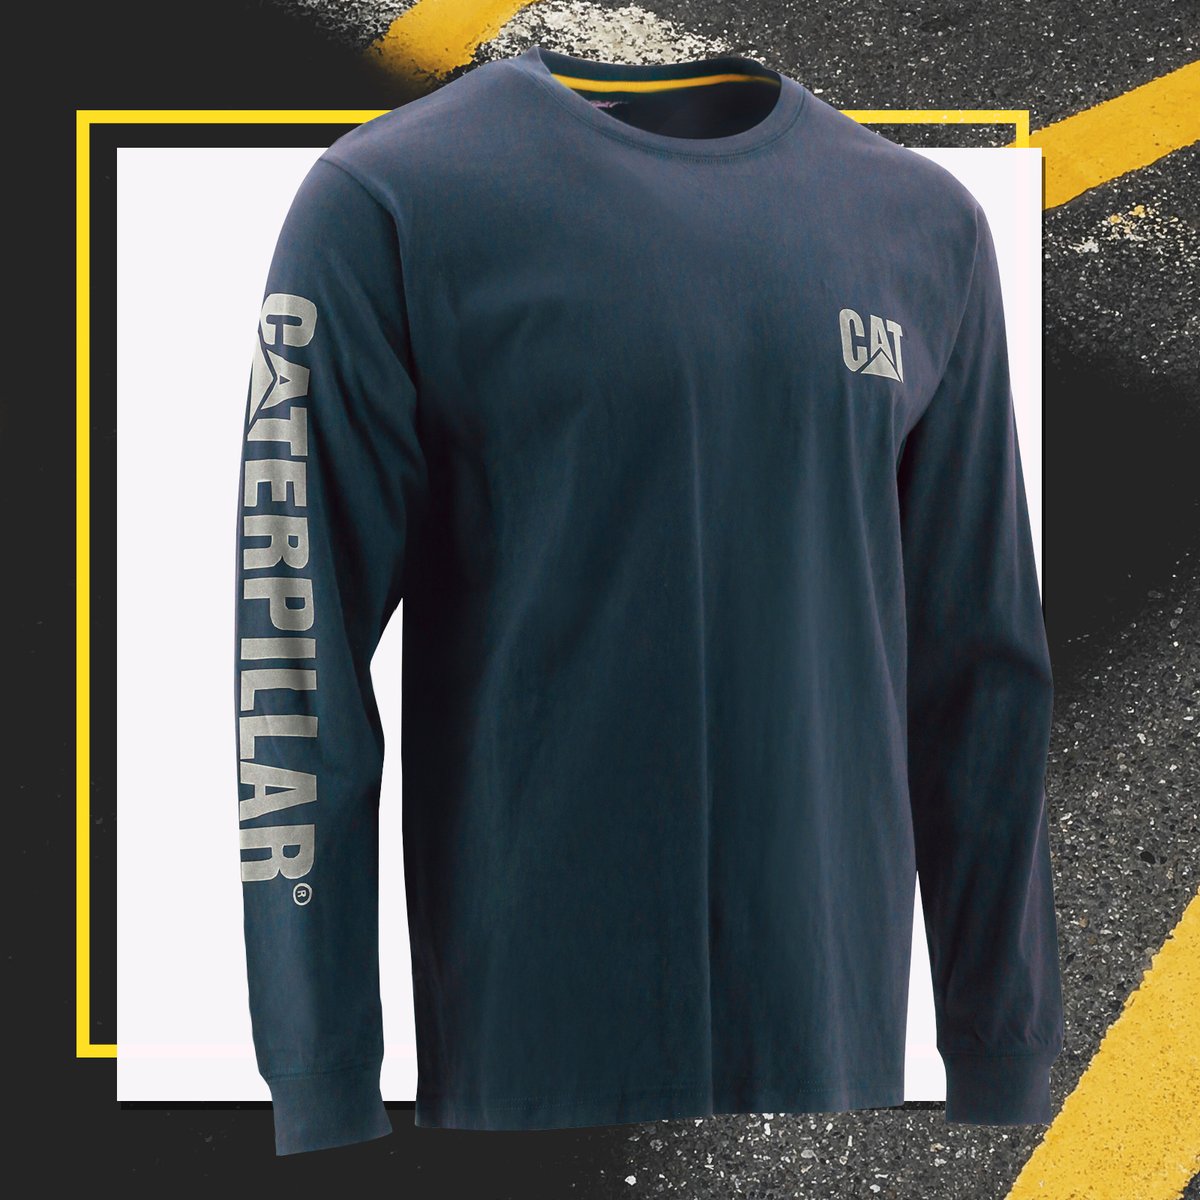 Show off your dedication to quality craftsmanship with the Trademark Banner L/S Tee. This long-sleeve tee is a testament to your commitment to excellence. bit.ly/44pIQ3k #catfootwearsa #footwear #streetstyle #caterpillar #apparel #catapparel